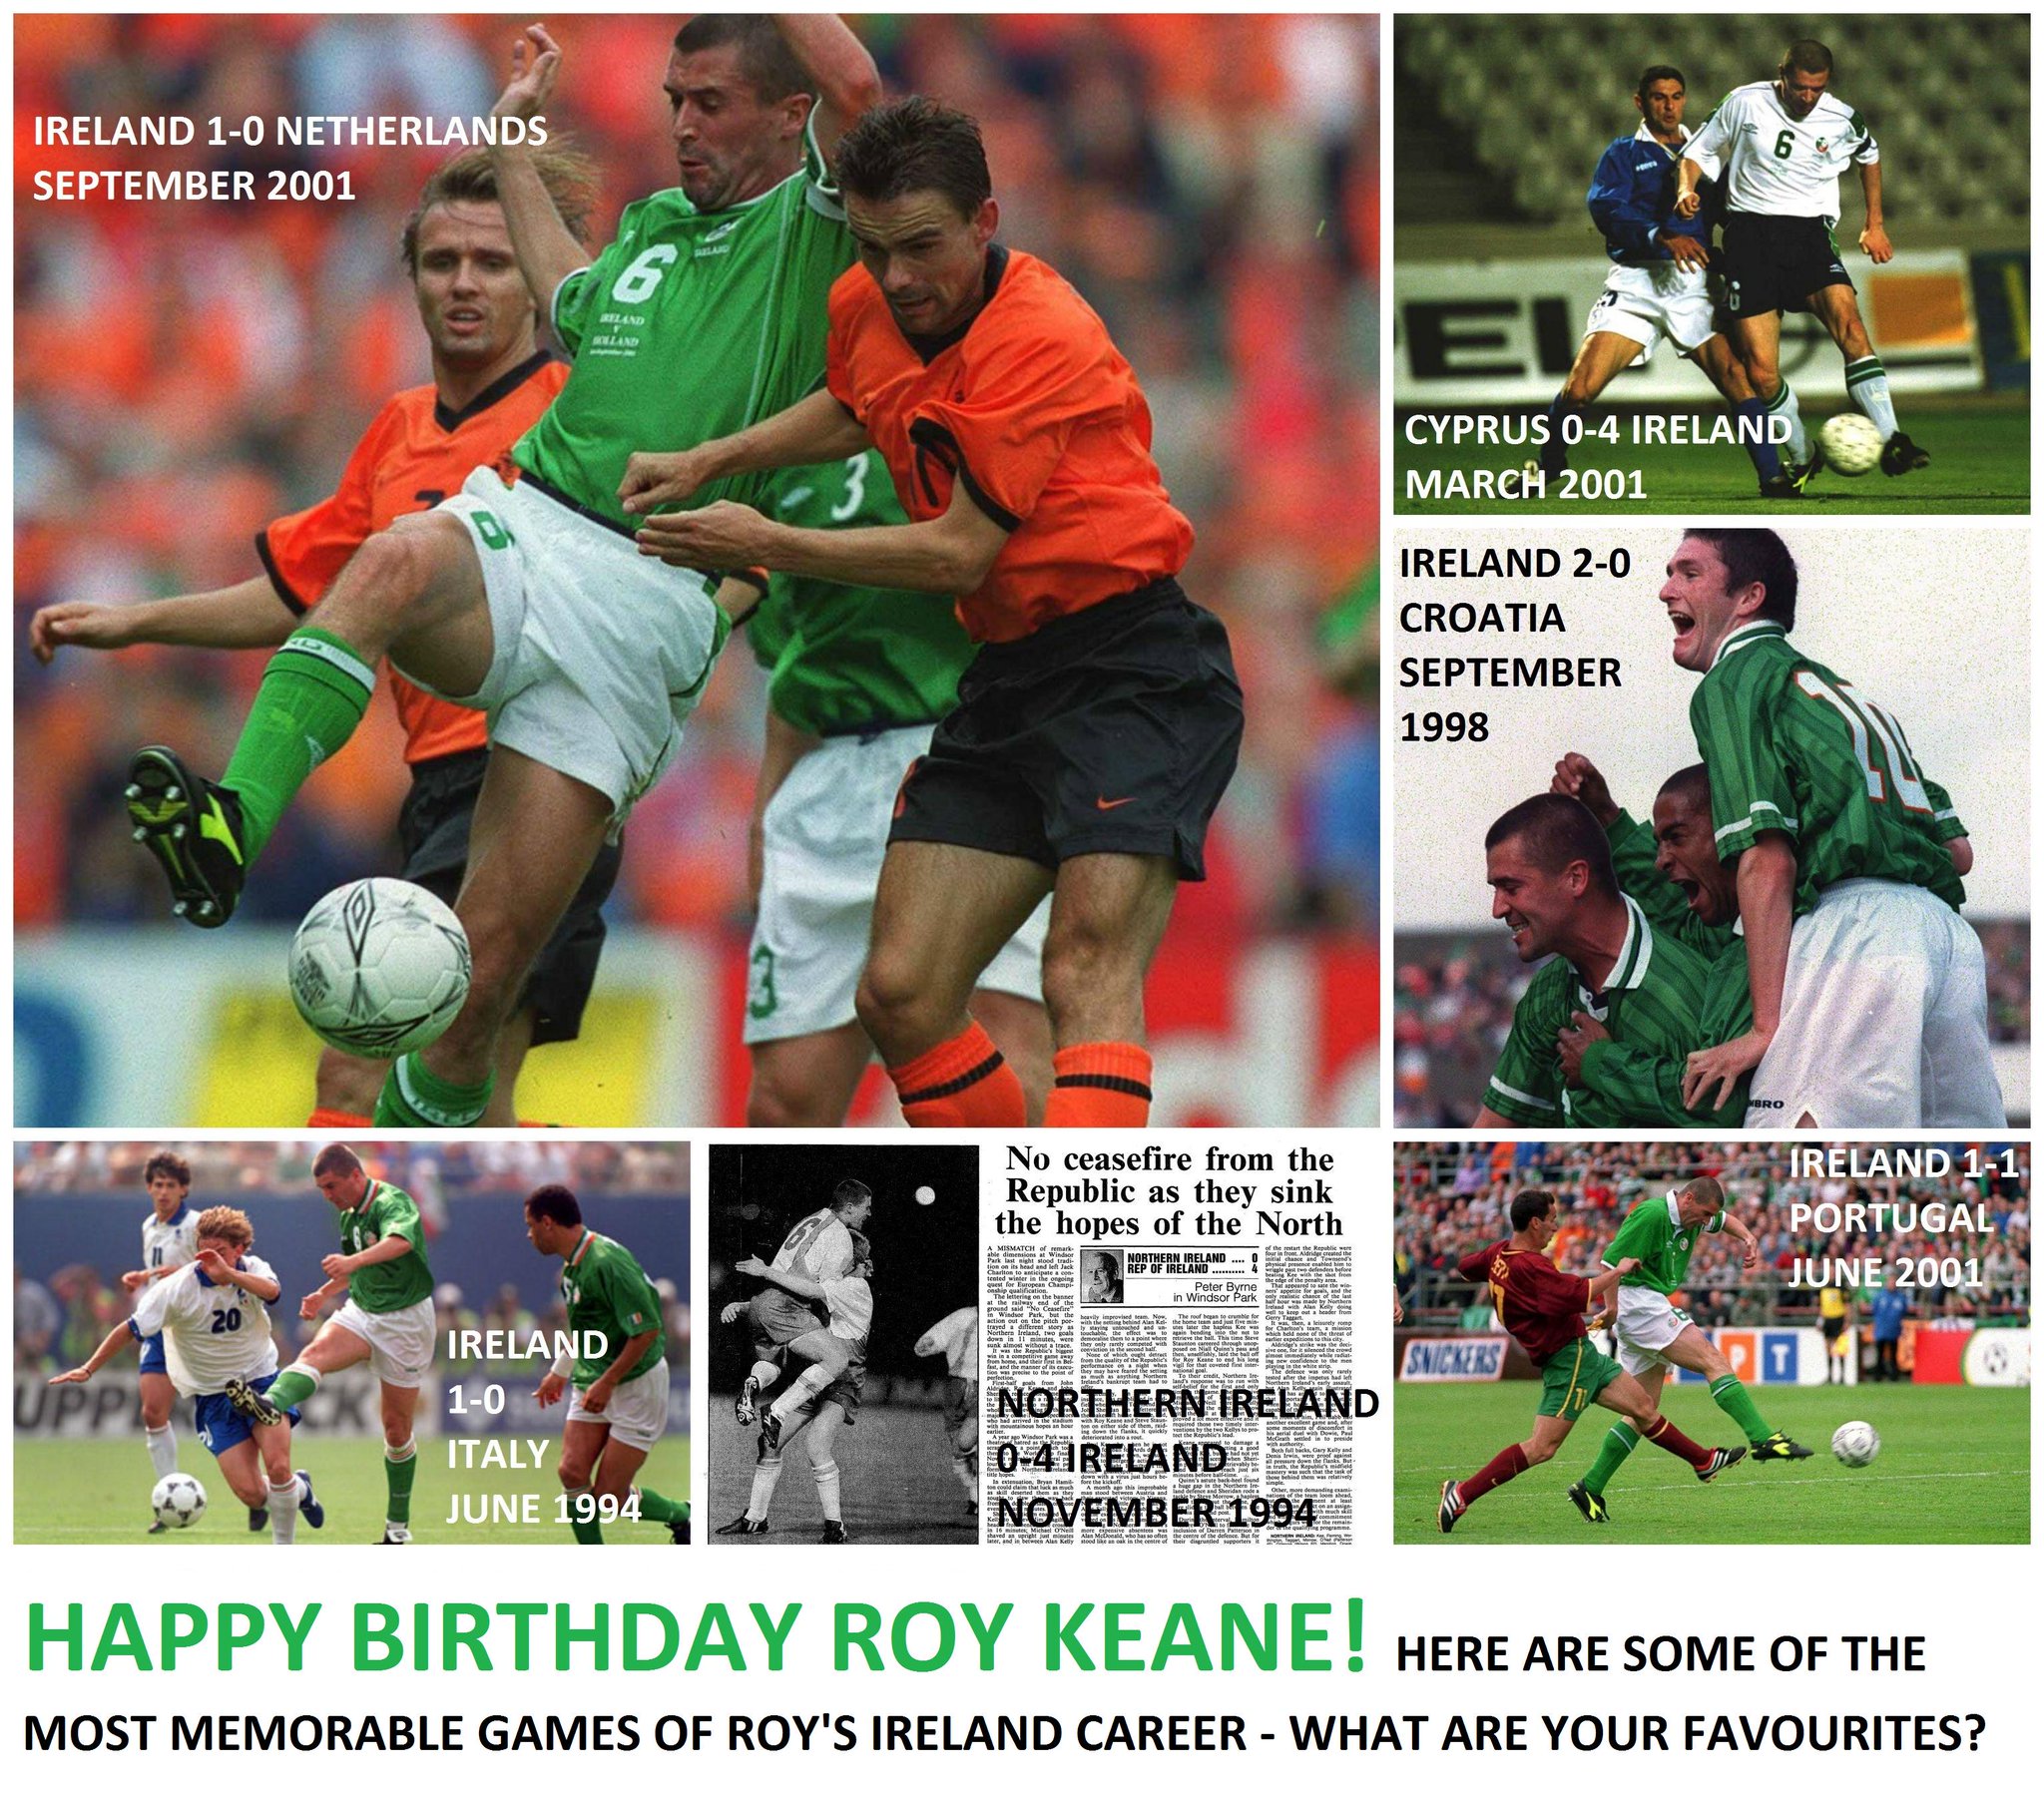 Happy birthday Ireland assistant manager Roy Keane!
What\s your favourite game from his international playing career? 